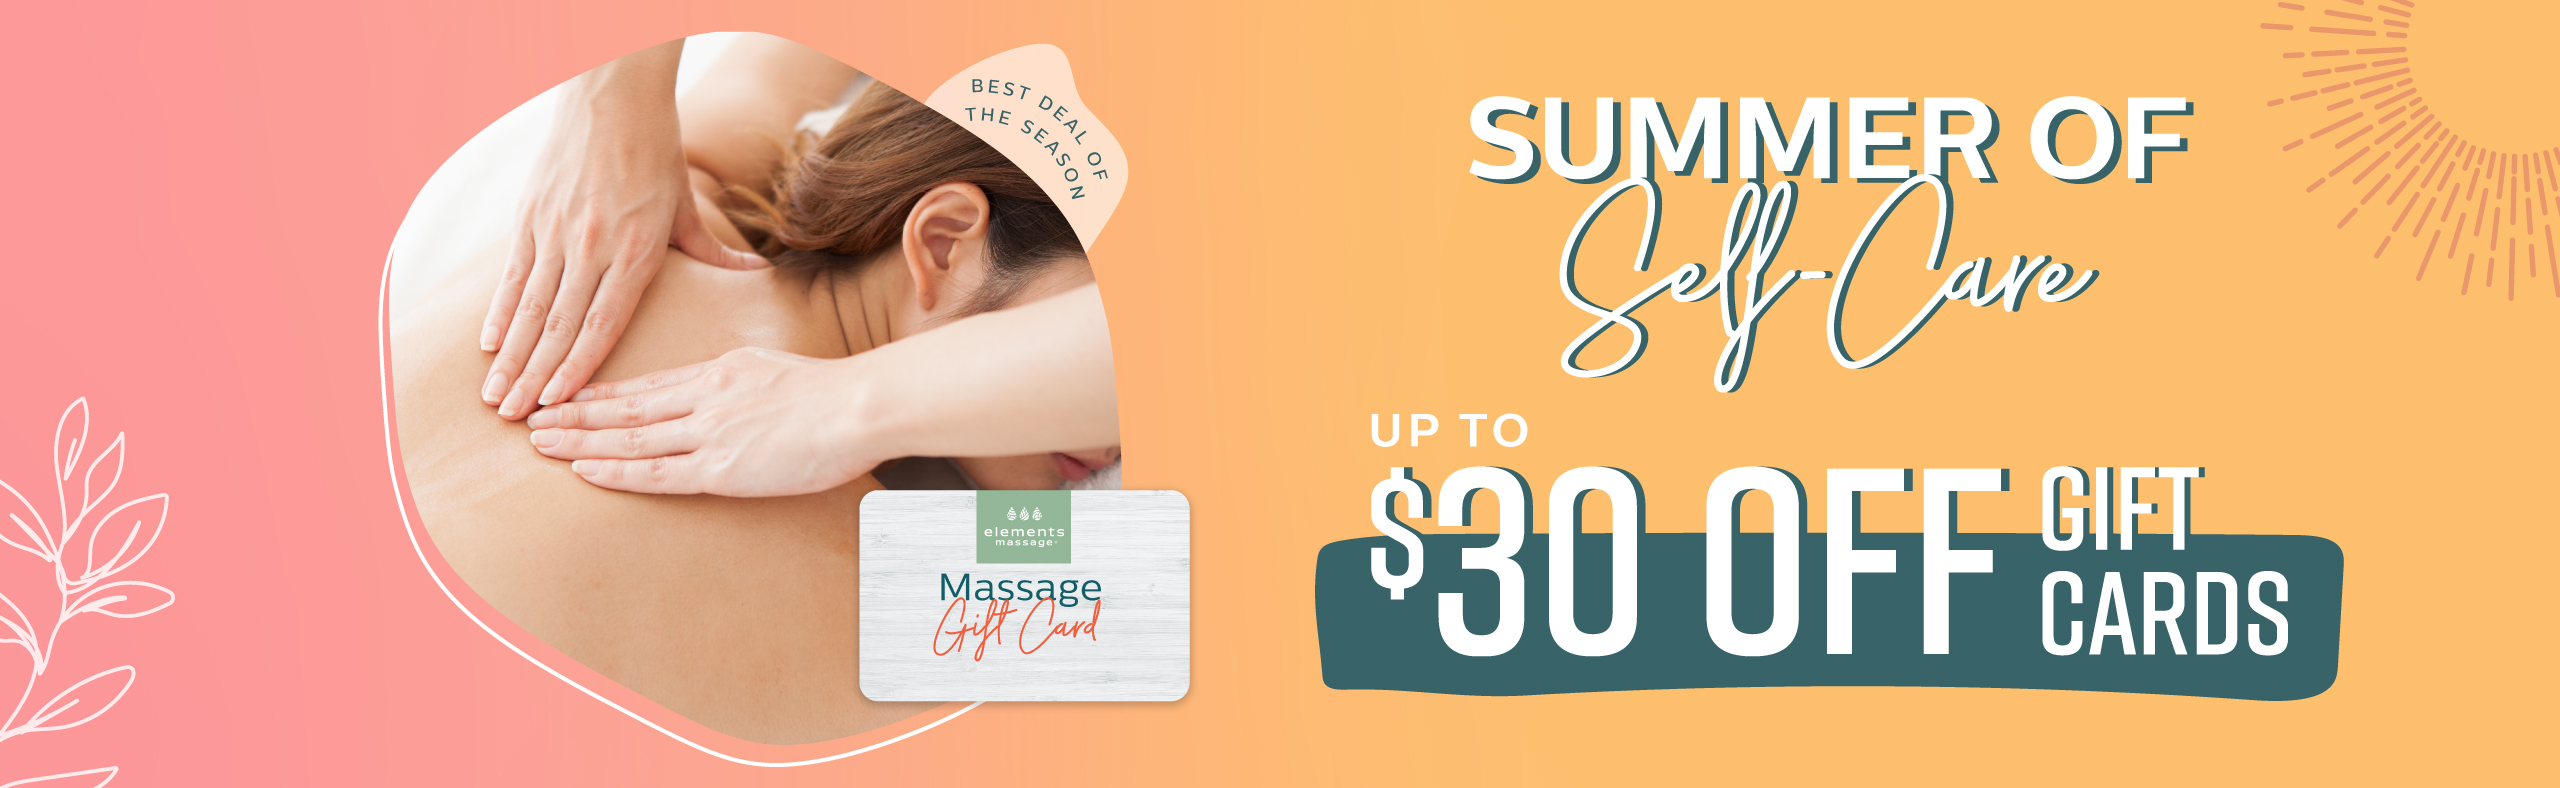 Summer of self care: save up to $30 on gift cards